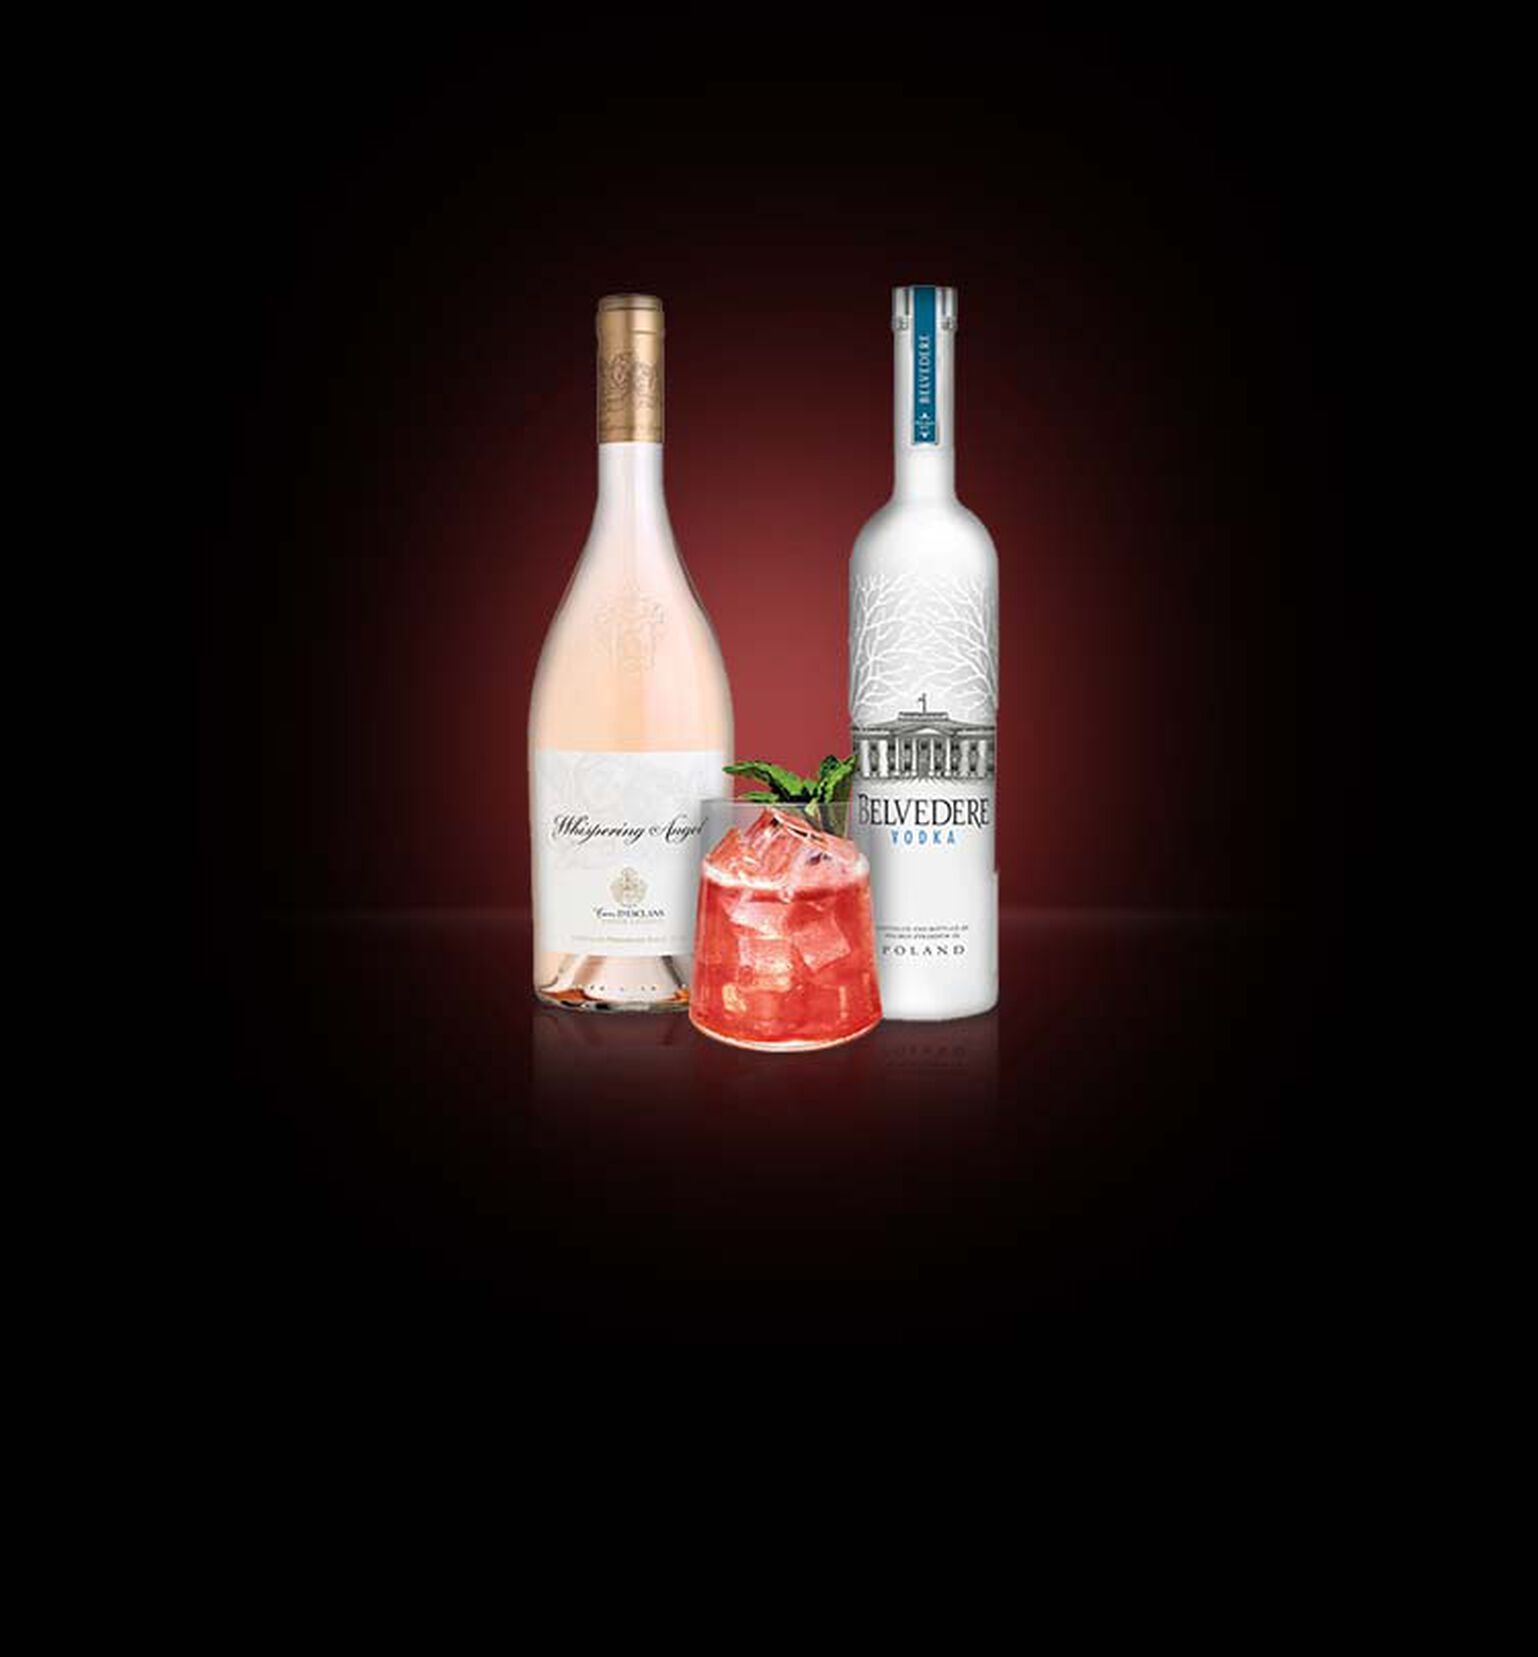 The Belvedere Vodka and Whispering Angel The Sunset Rose Cocktail